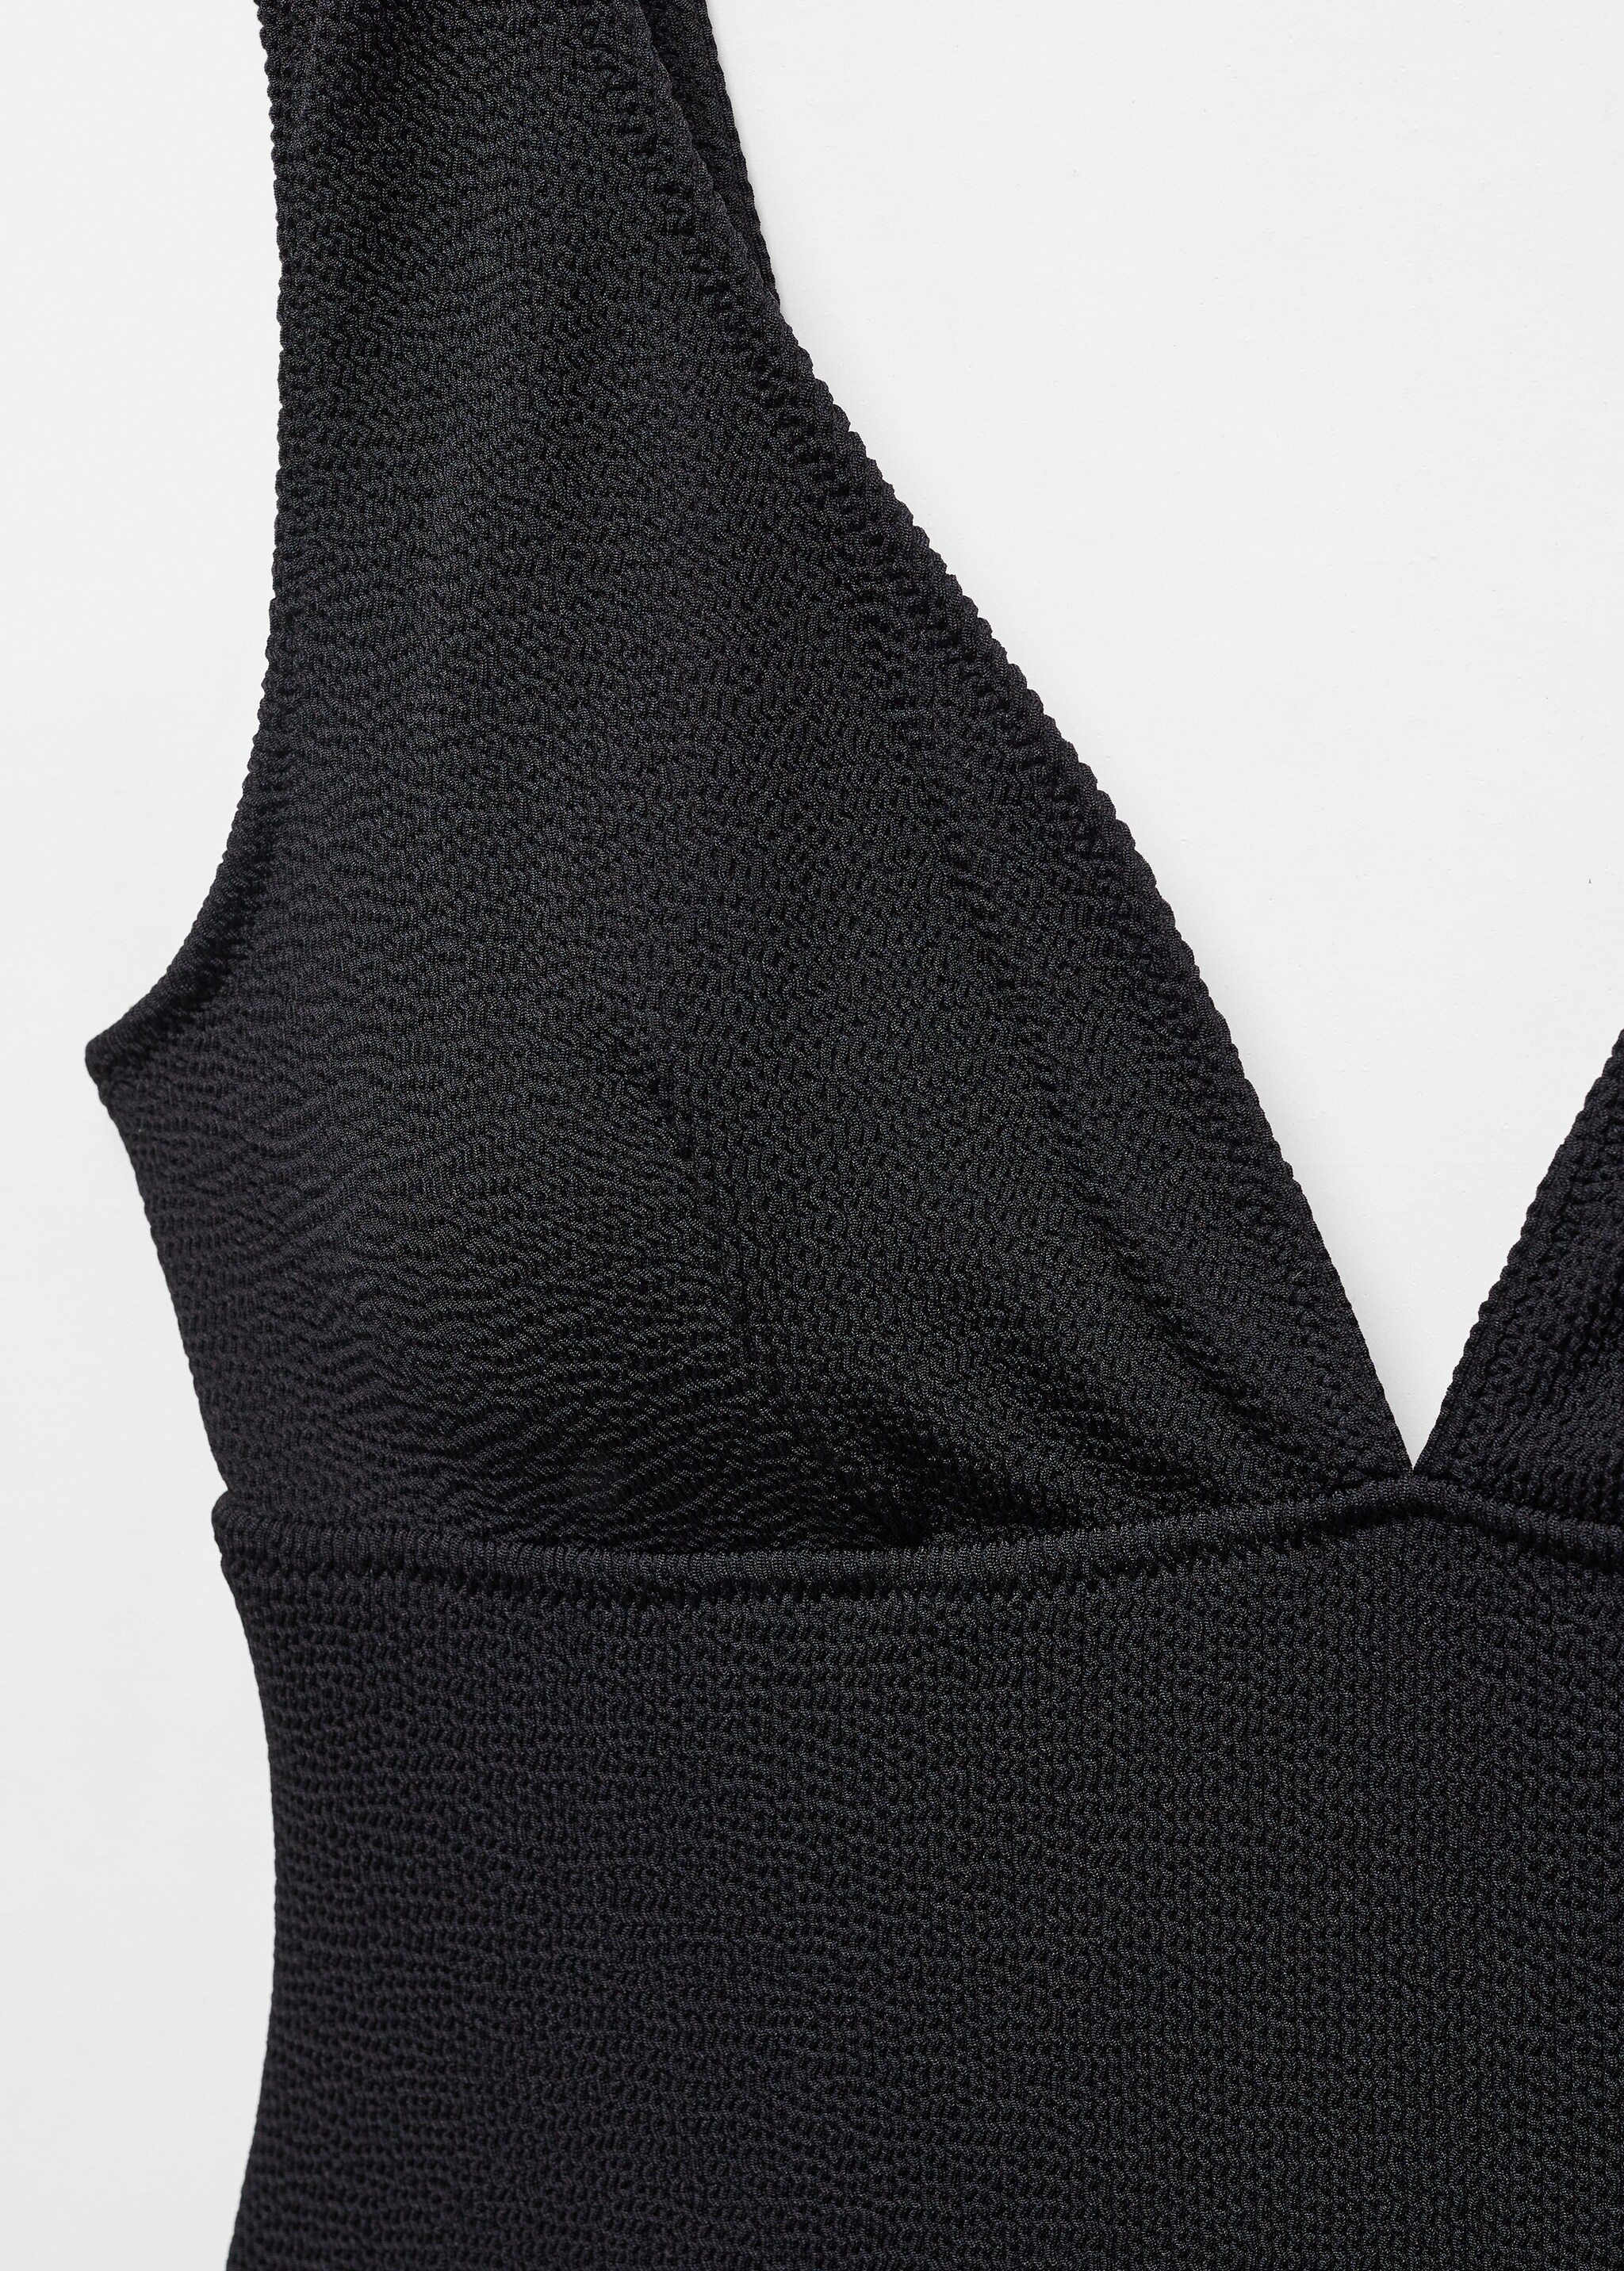 V-neck swimsuit - Details of the article 8